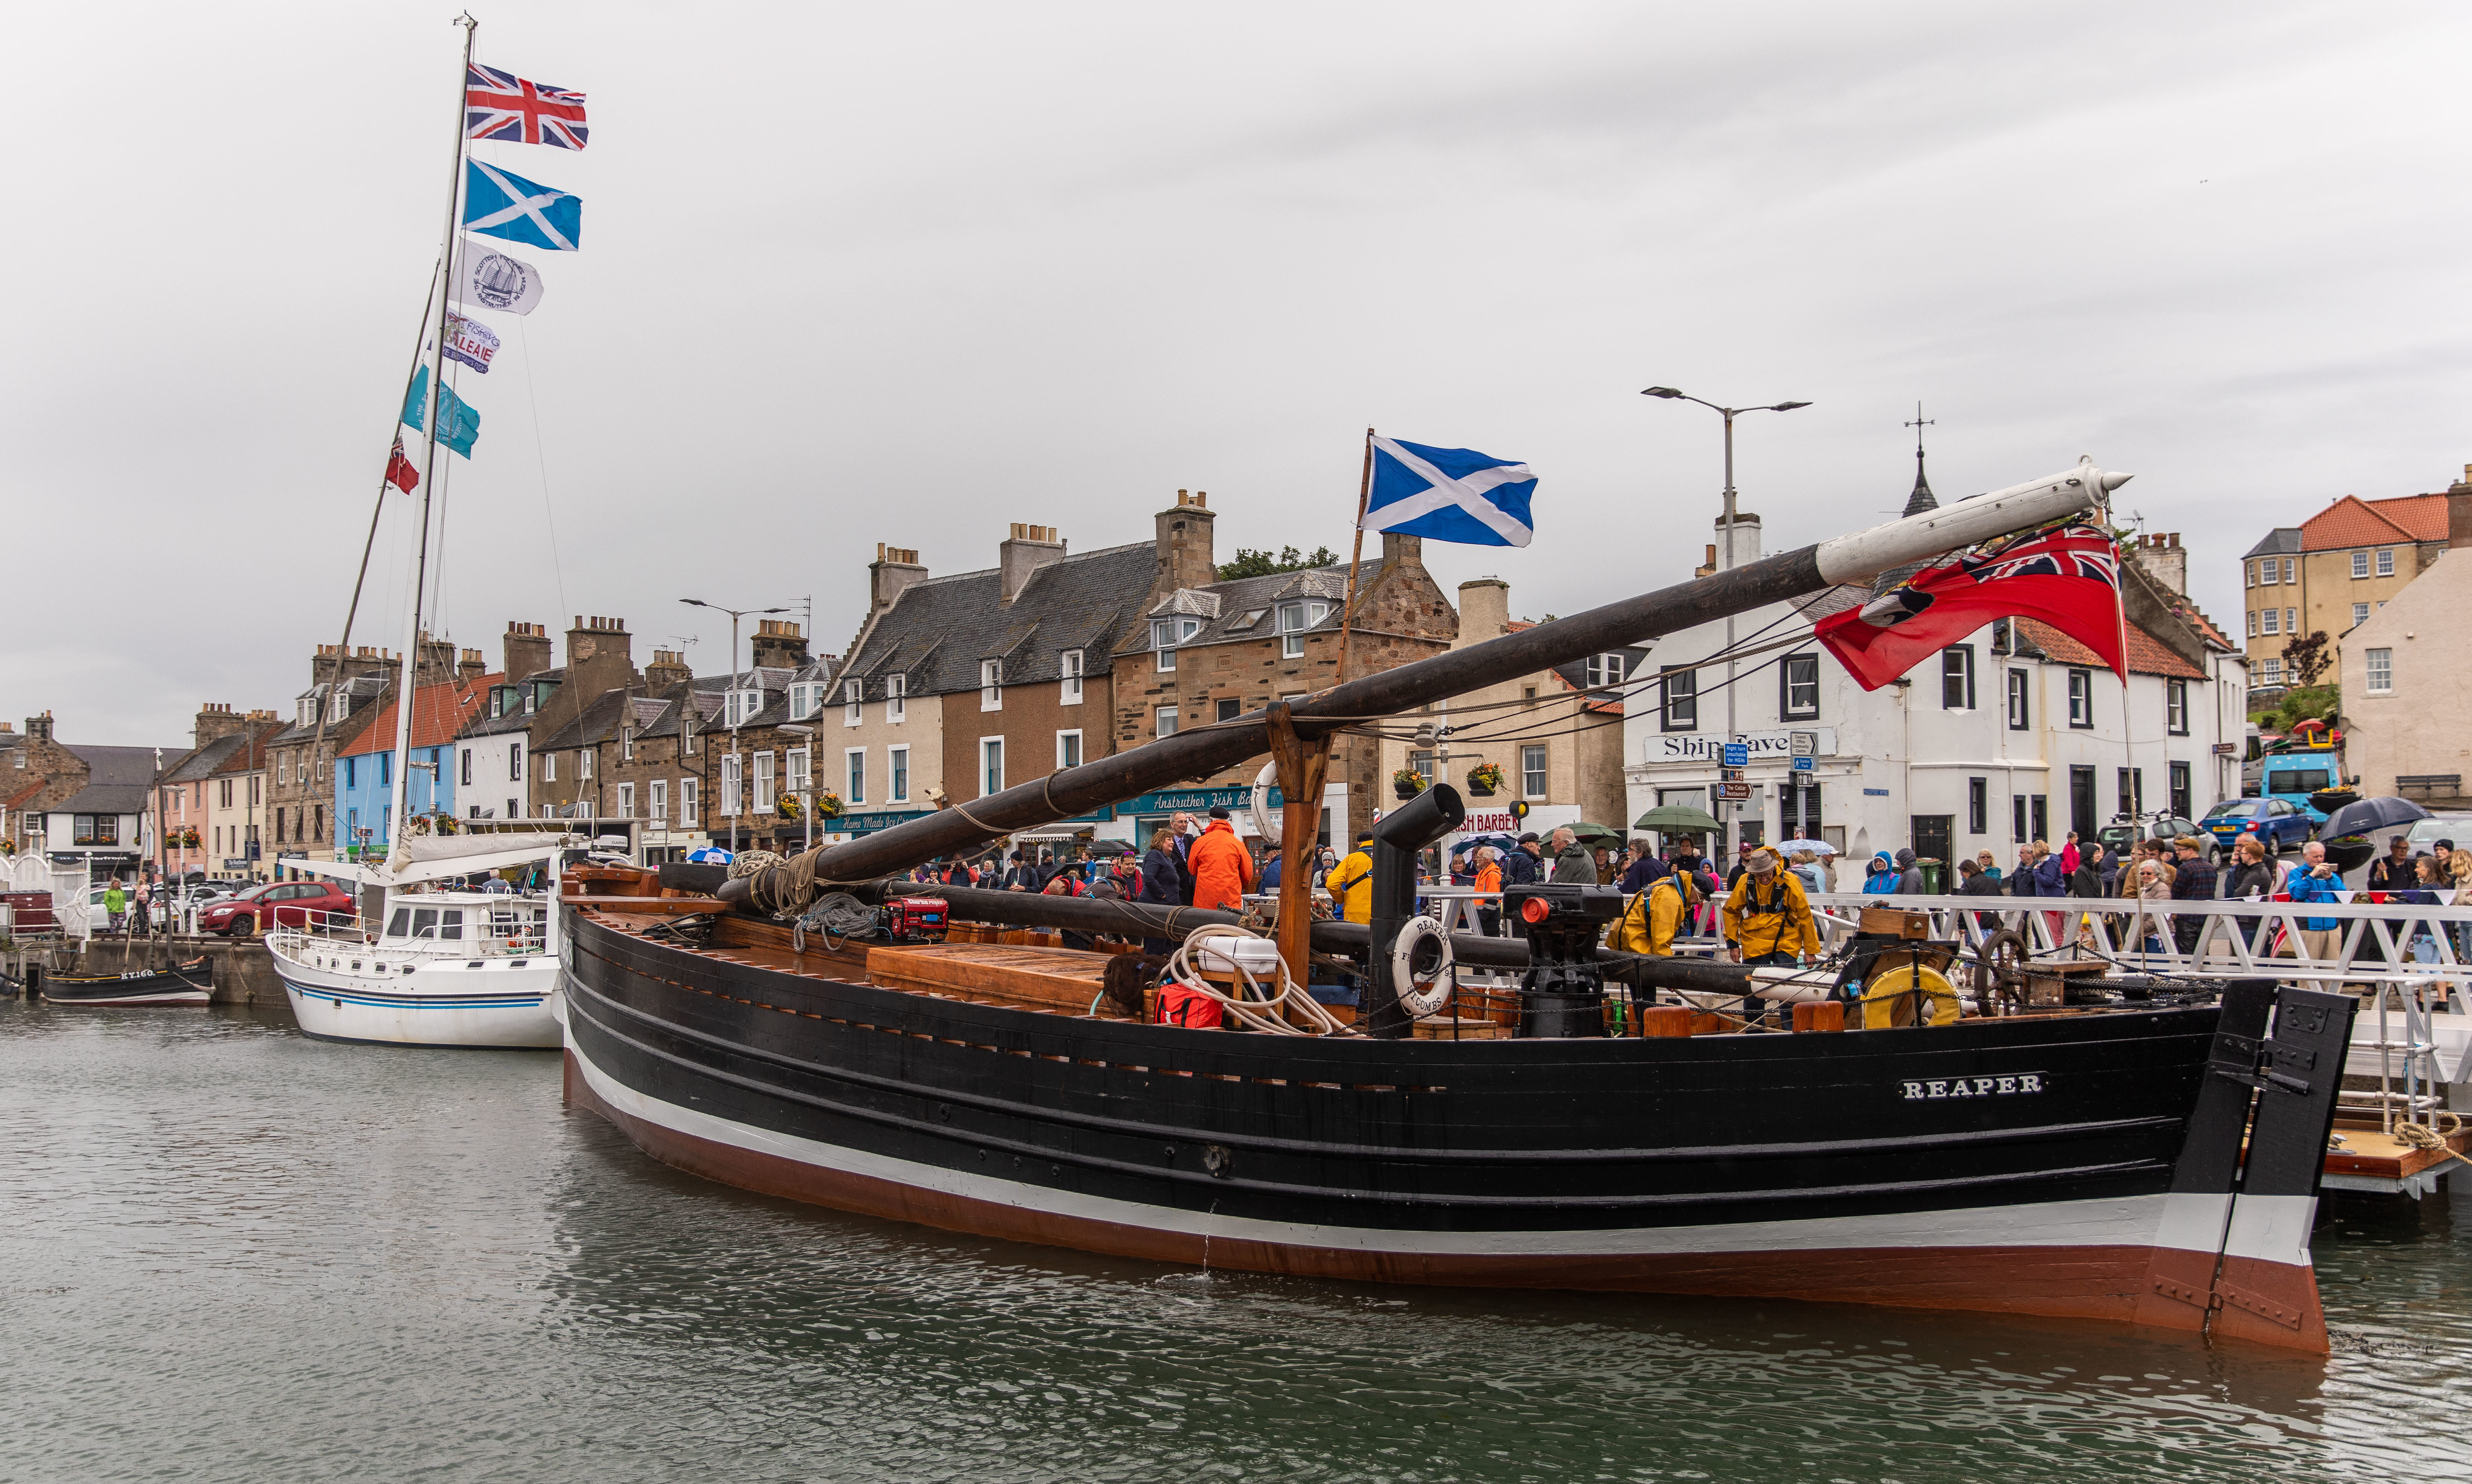 The Reaper returns to Anstruther.